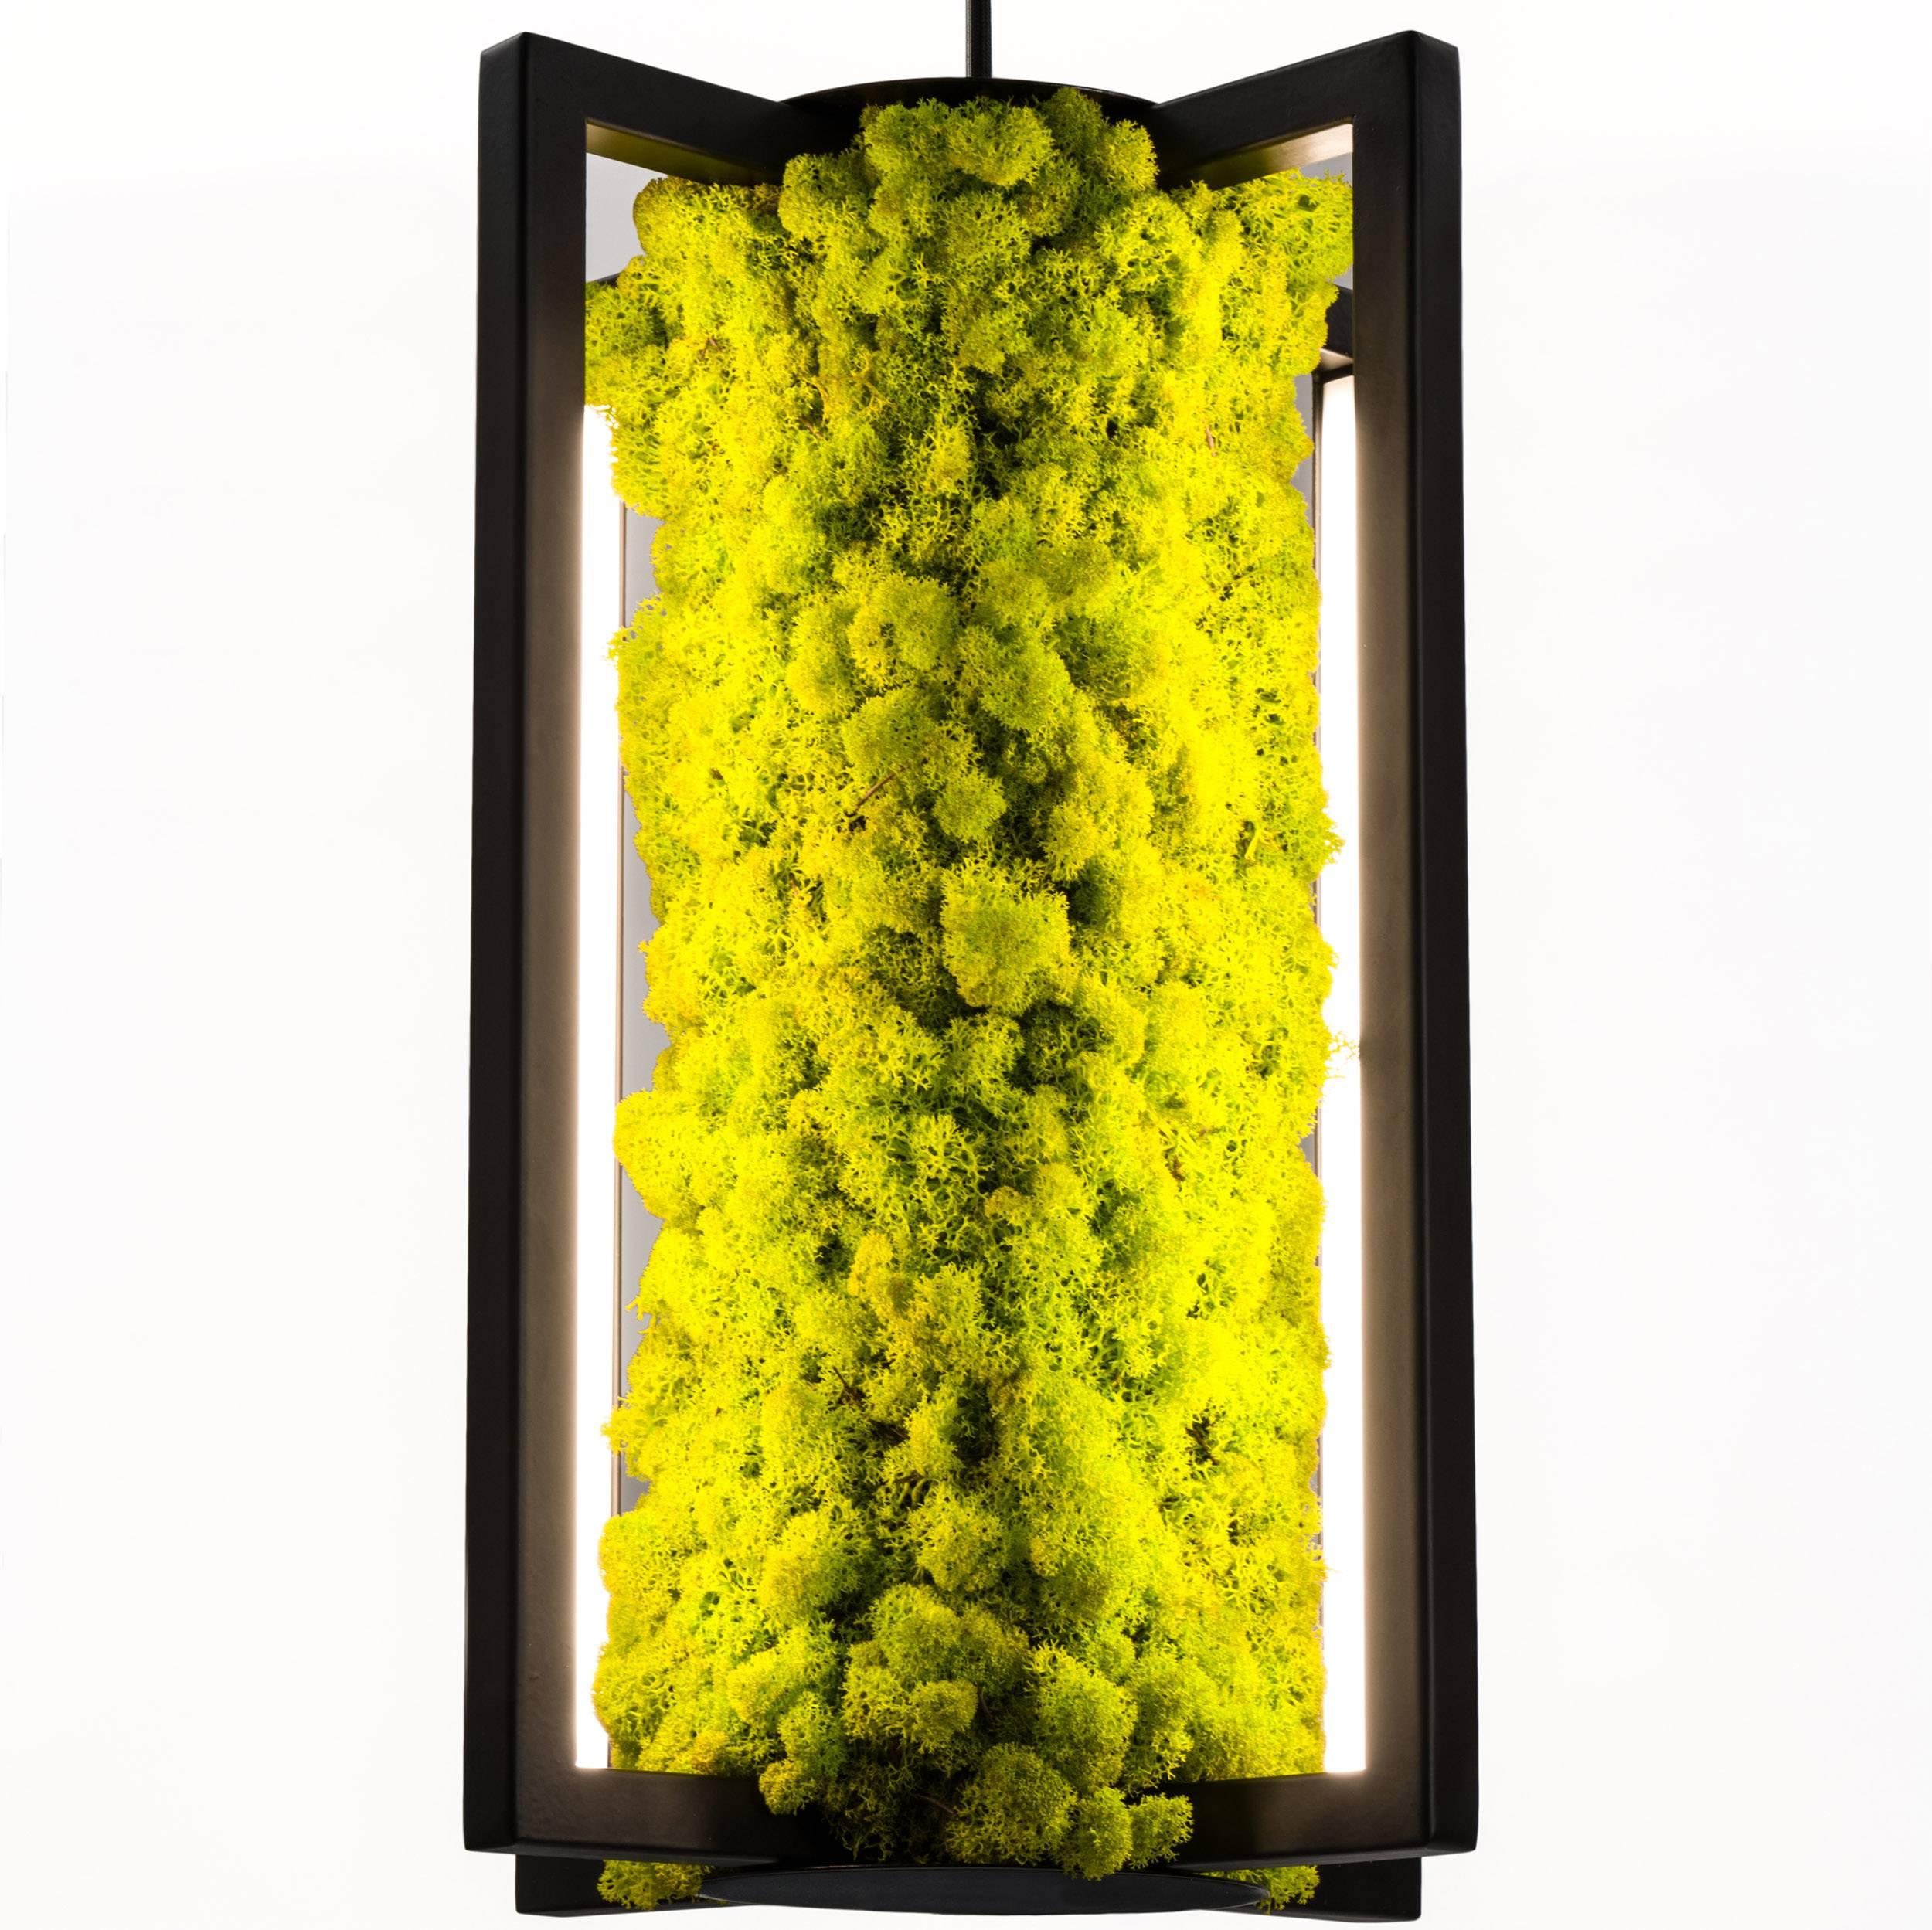 This Scandinavian Minimalist ceiling lamp plays with the Northern charm of moss. We wanted to bring the self-standing “green concept” into the world of lighting. This moss grows naturally in Scandinavia where it is harvested and dried. 

To the eye